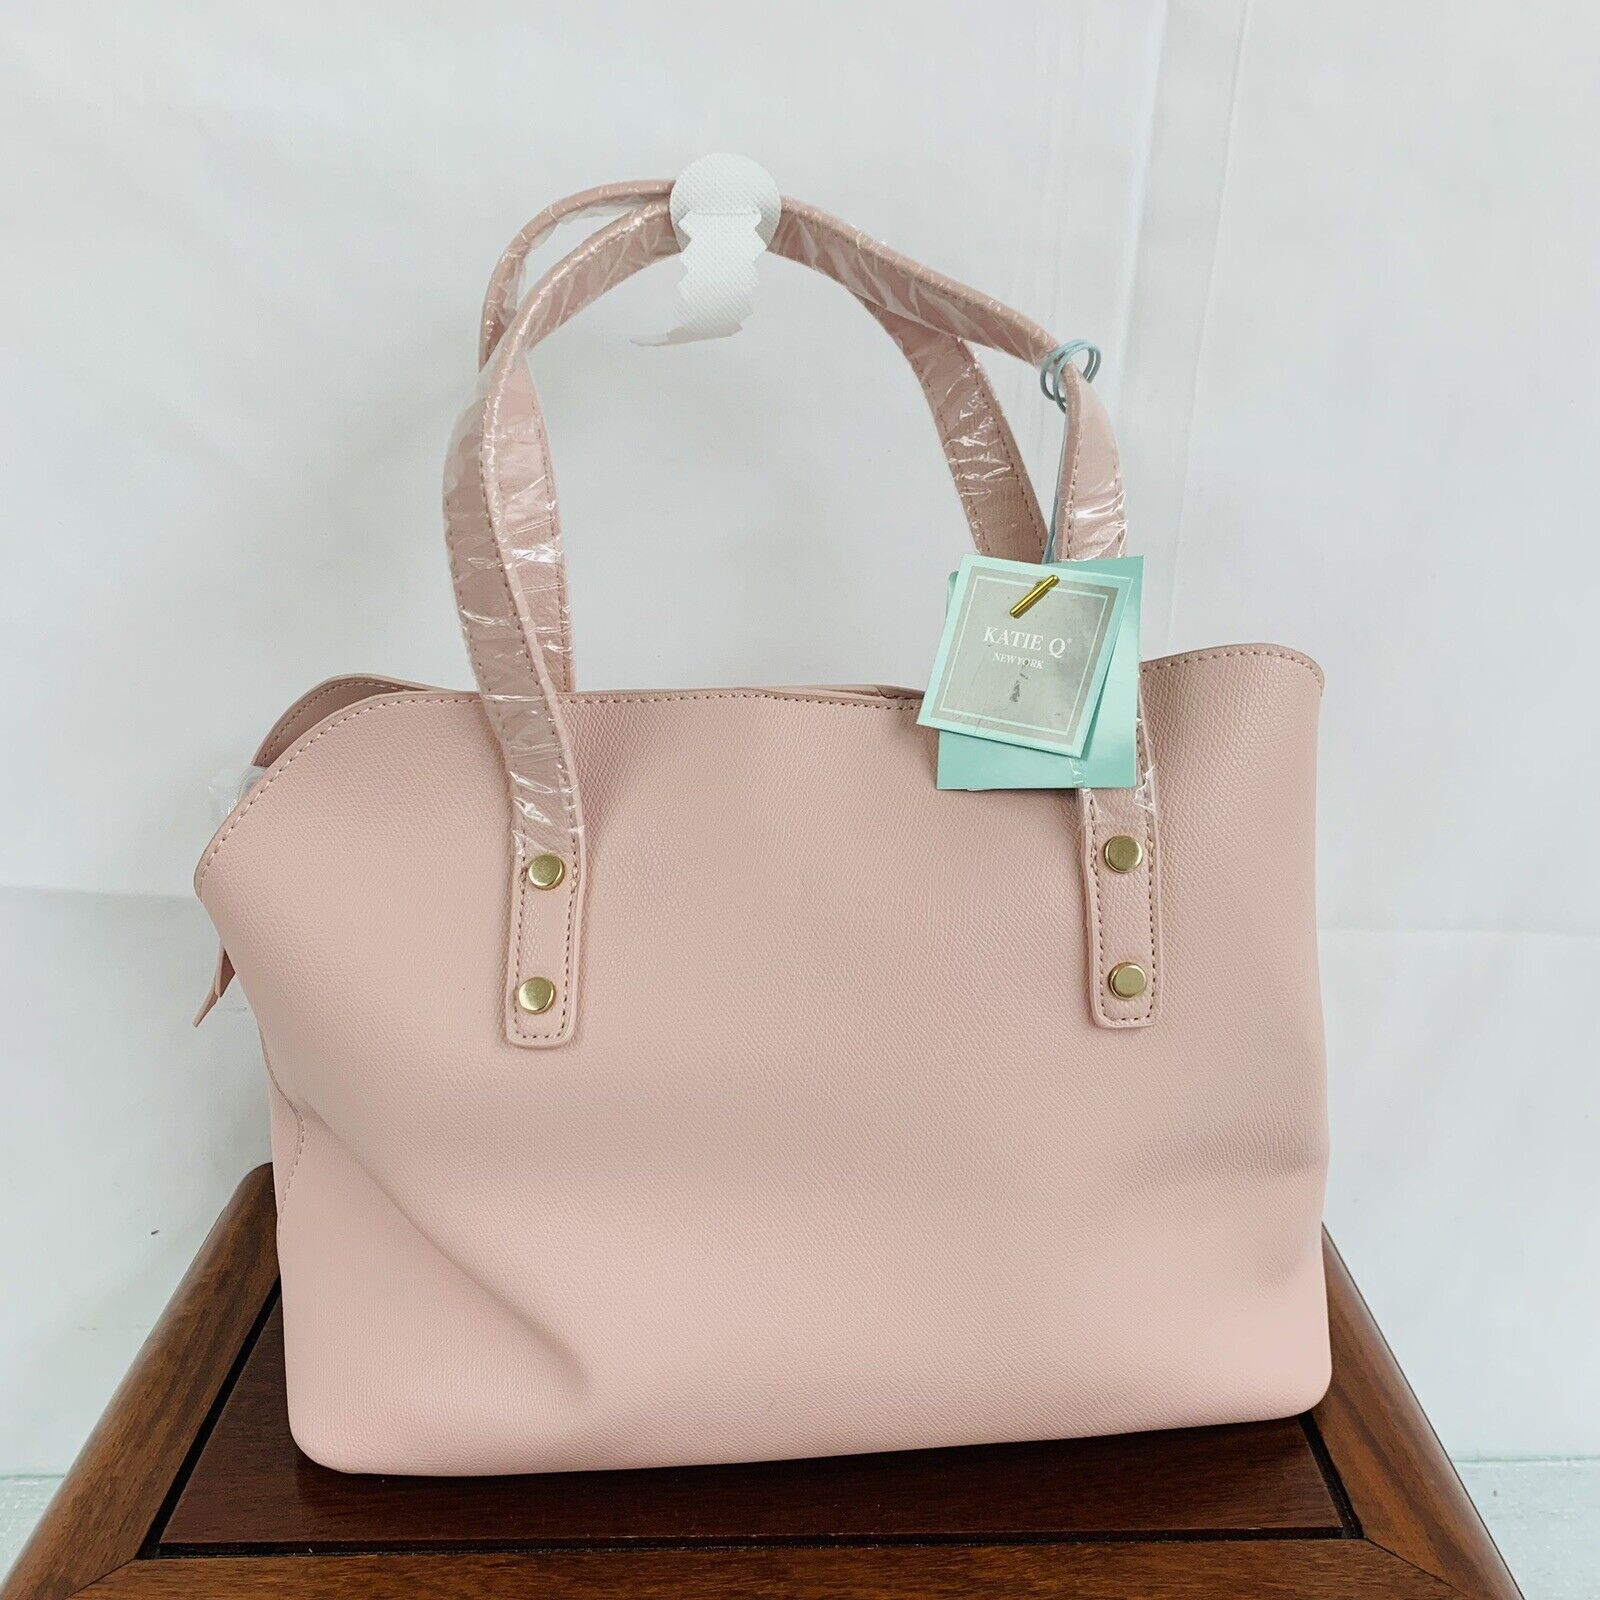 Katie Q Pink Blush Style Pink Faux Leather Purse - image 2